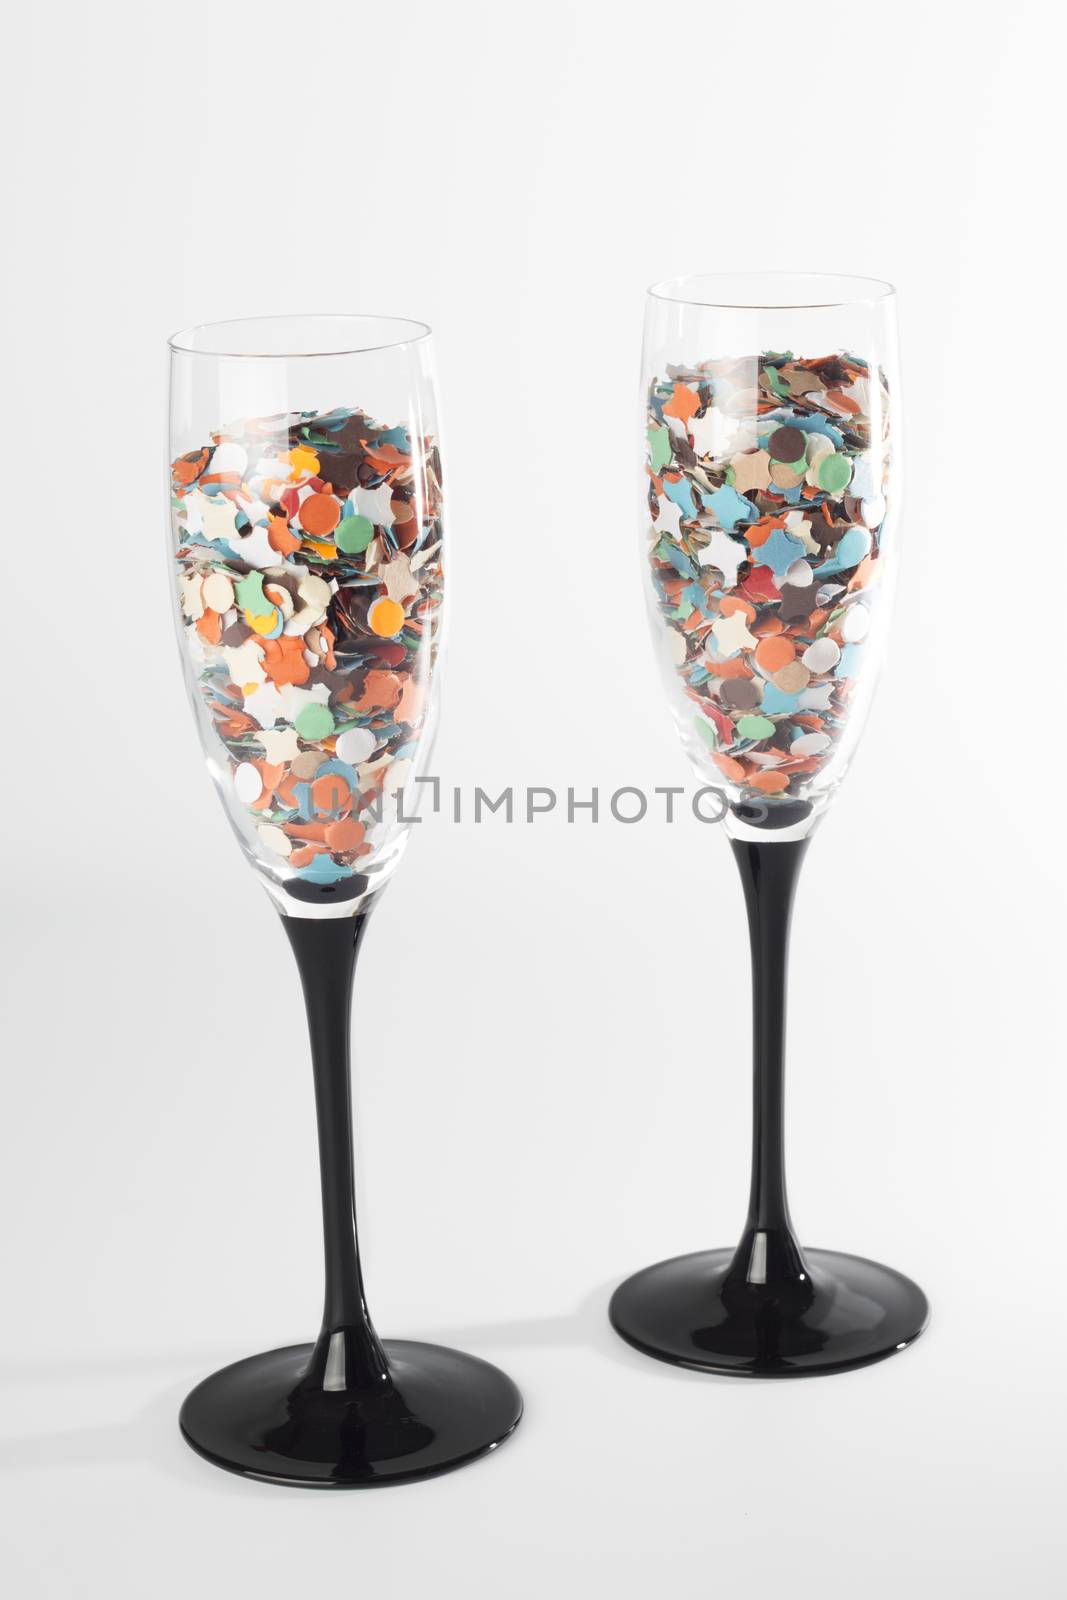 Champaing glasse with confetti, isolated on white background